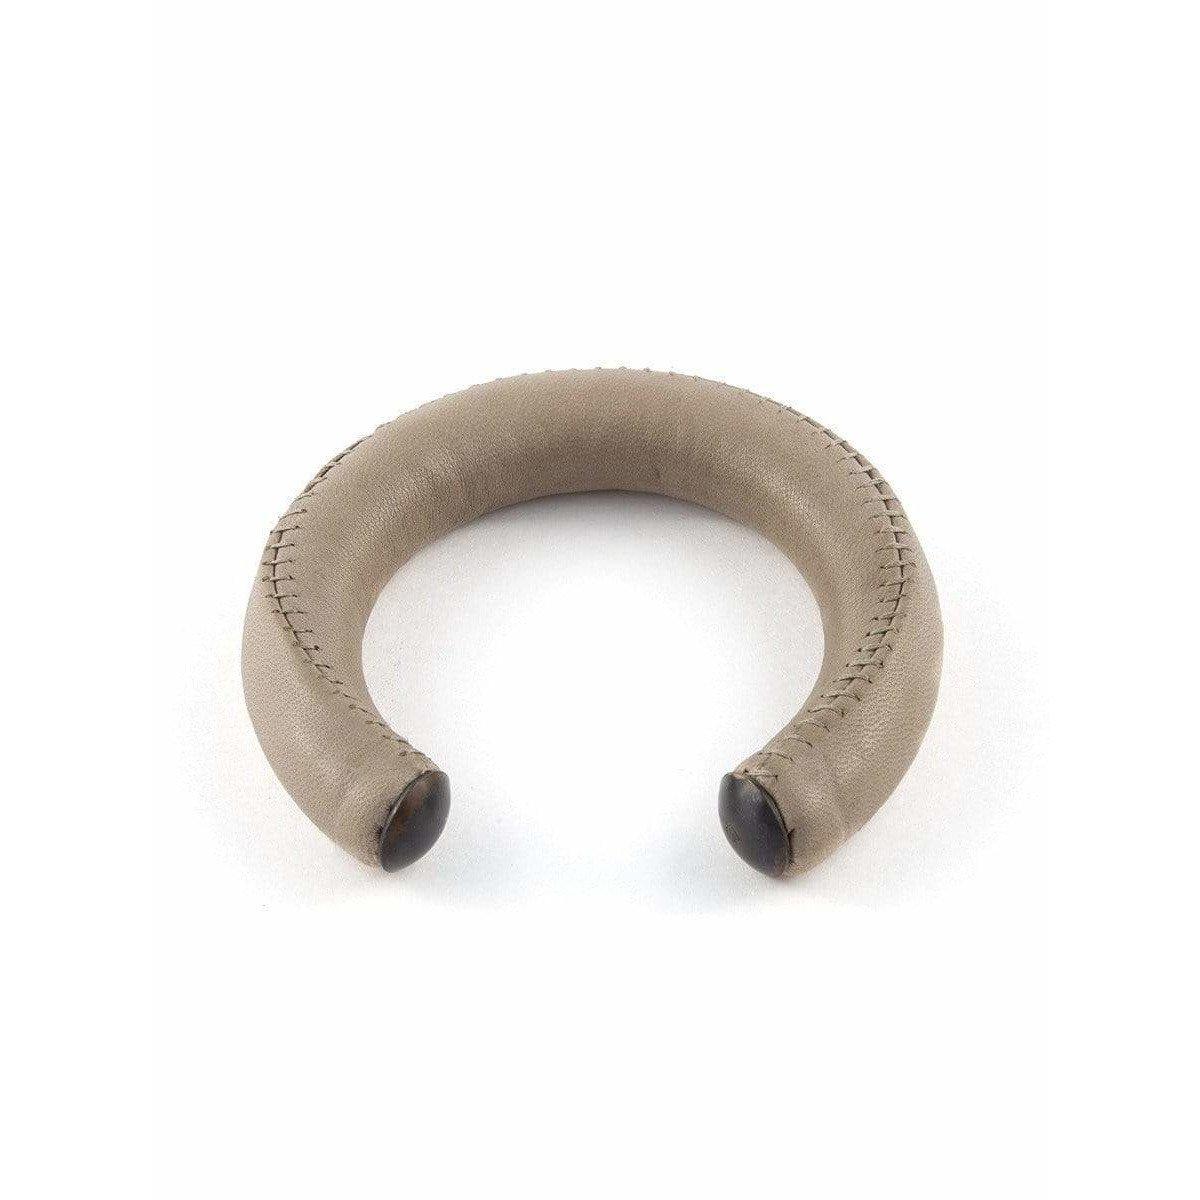 Leather Molded Bangle in light stone with stitch detailing and metal tips from Damir Doma. 